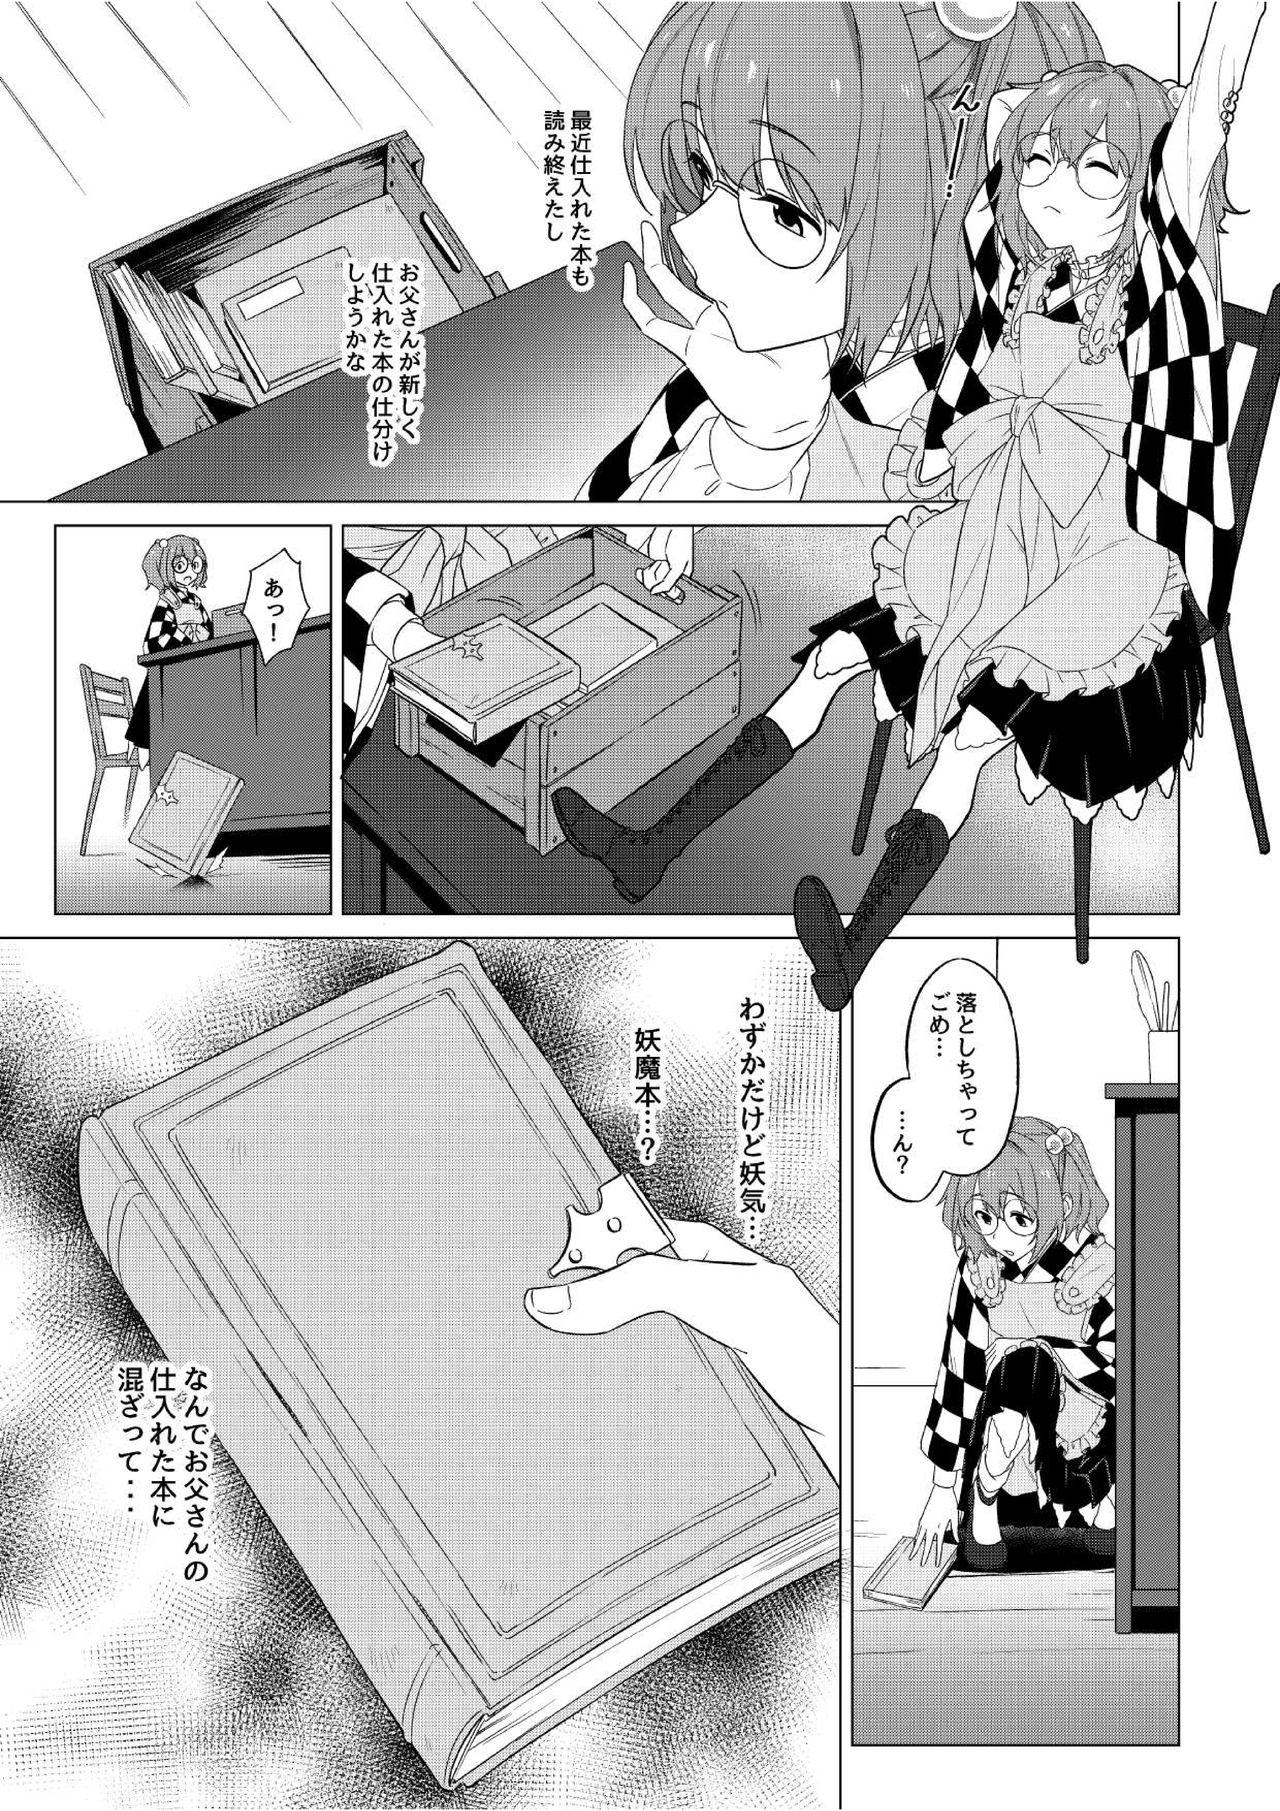 Assfingering Suzunooto wa Tooku - Touhou project Oil - Page 2